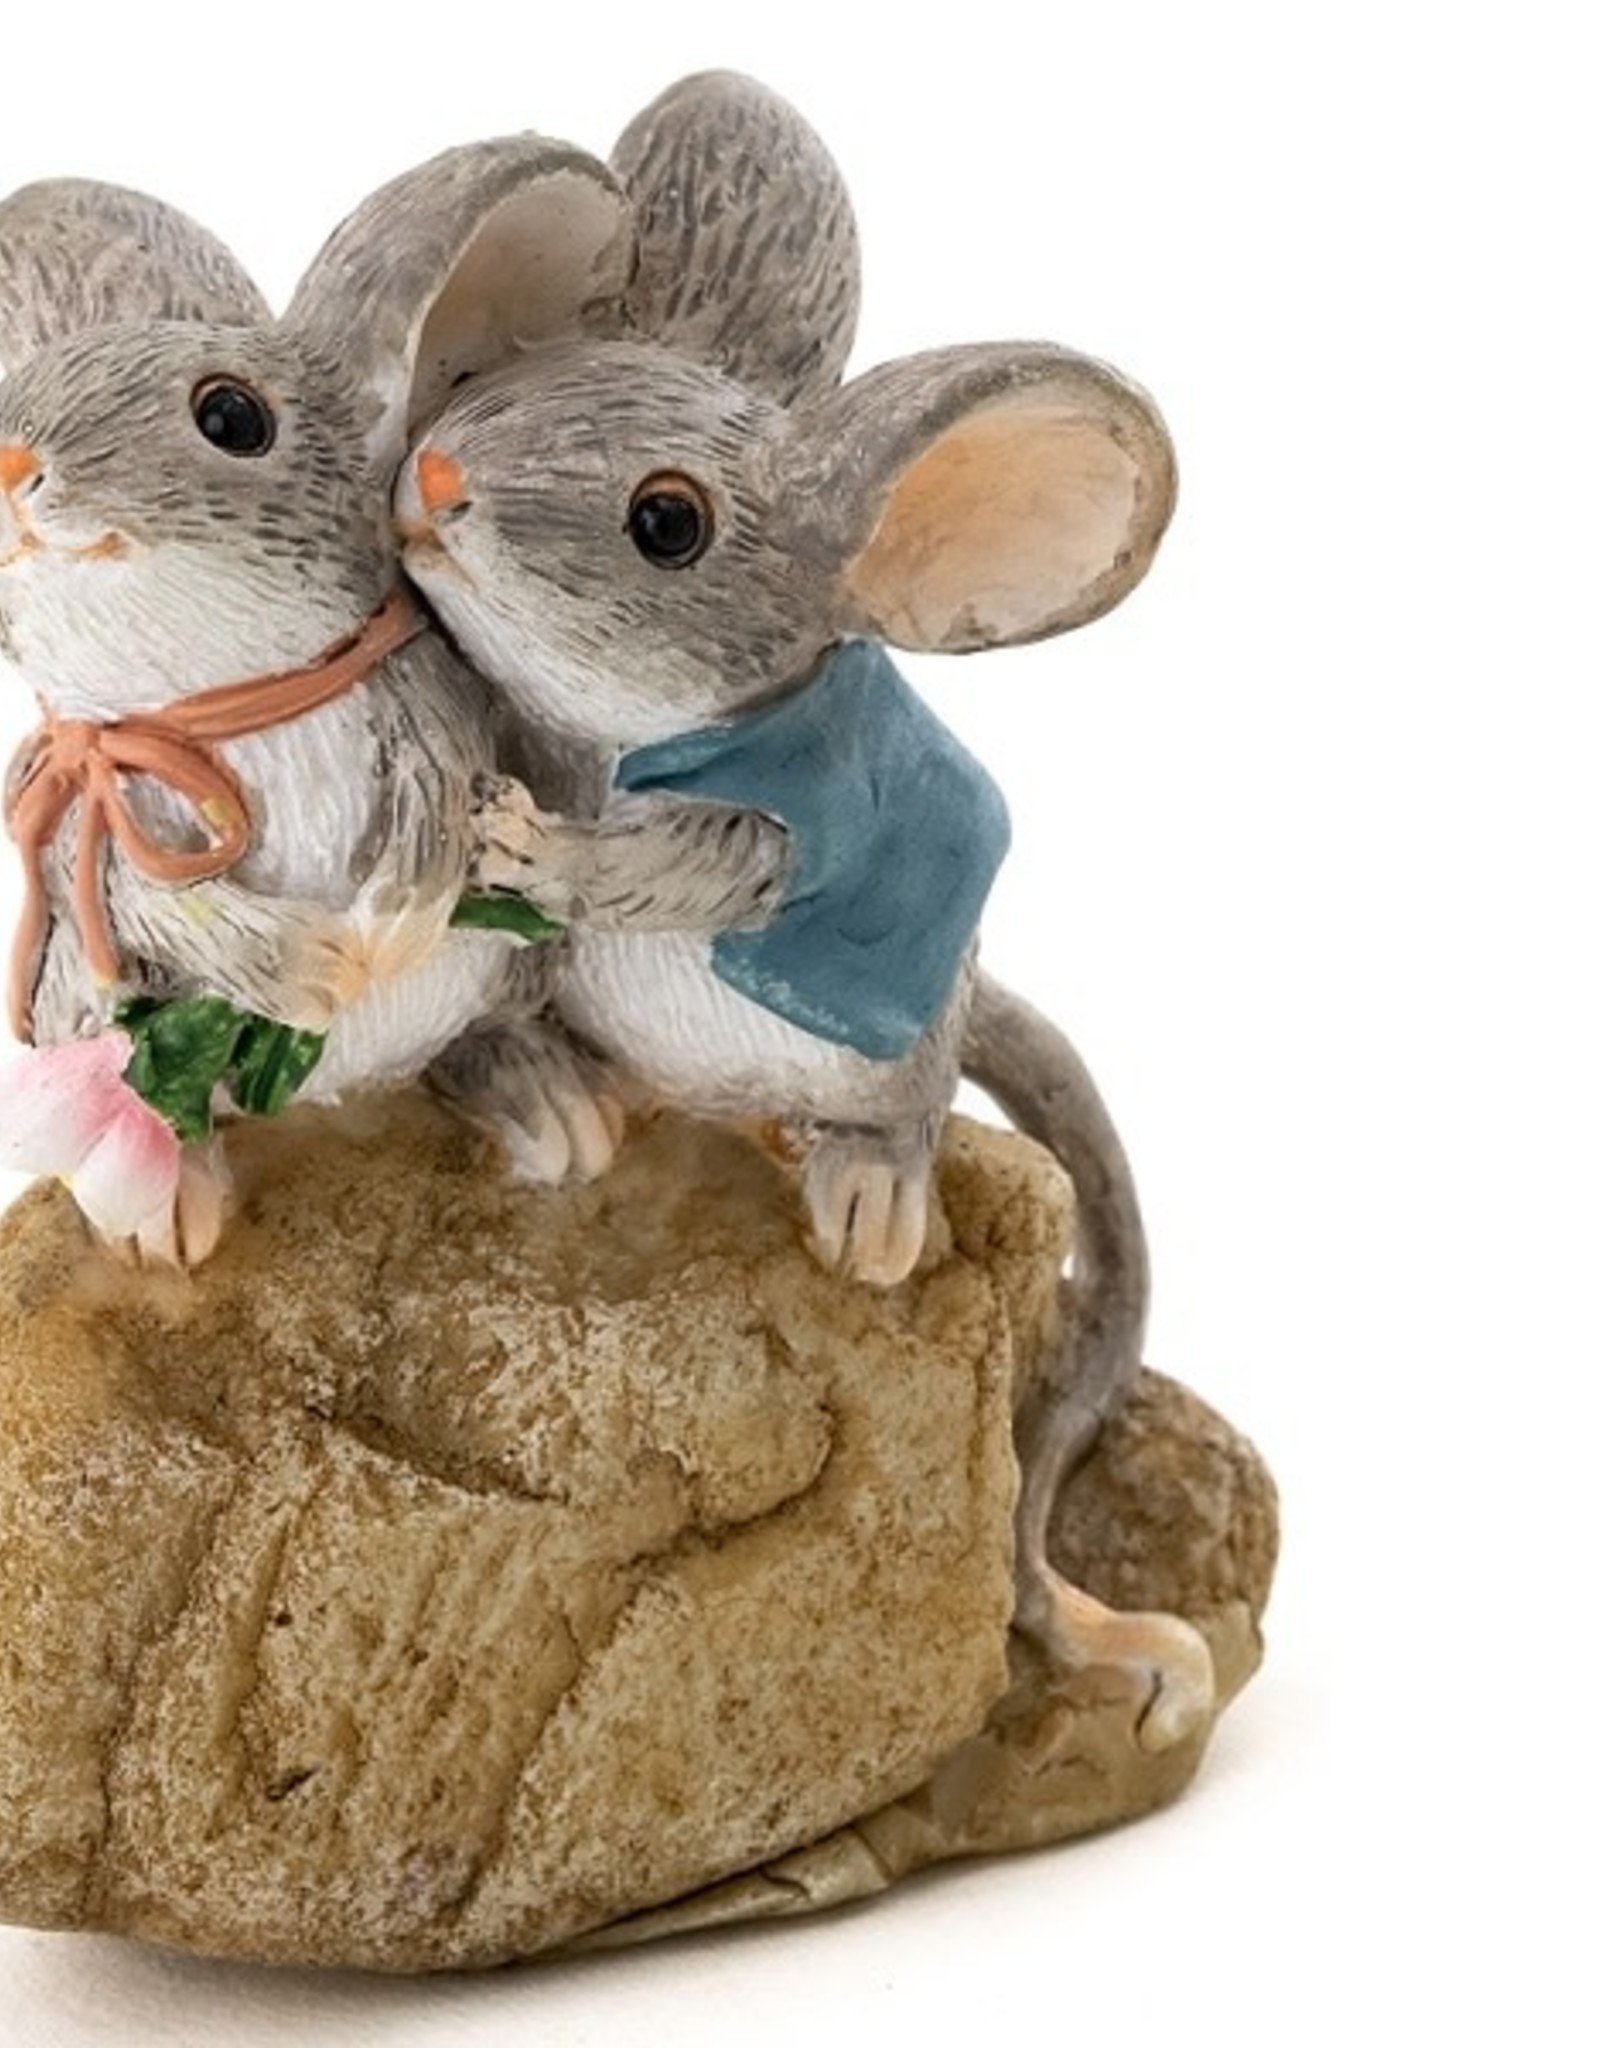 Top Land Trading TINY MICE LOVERS